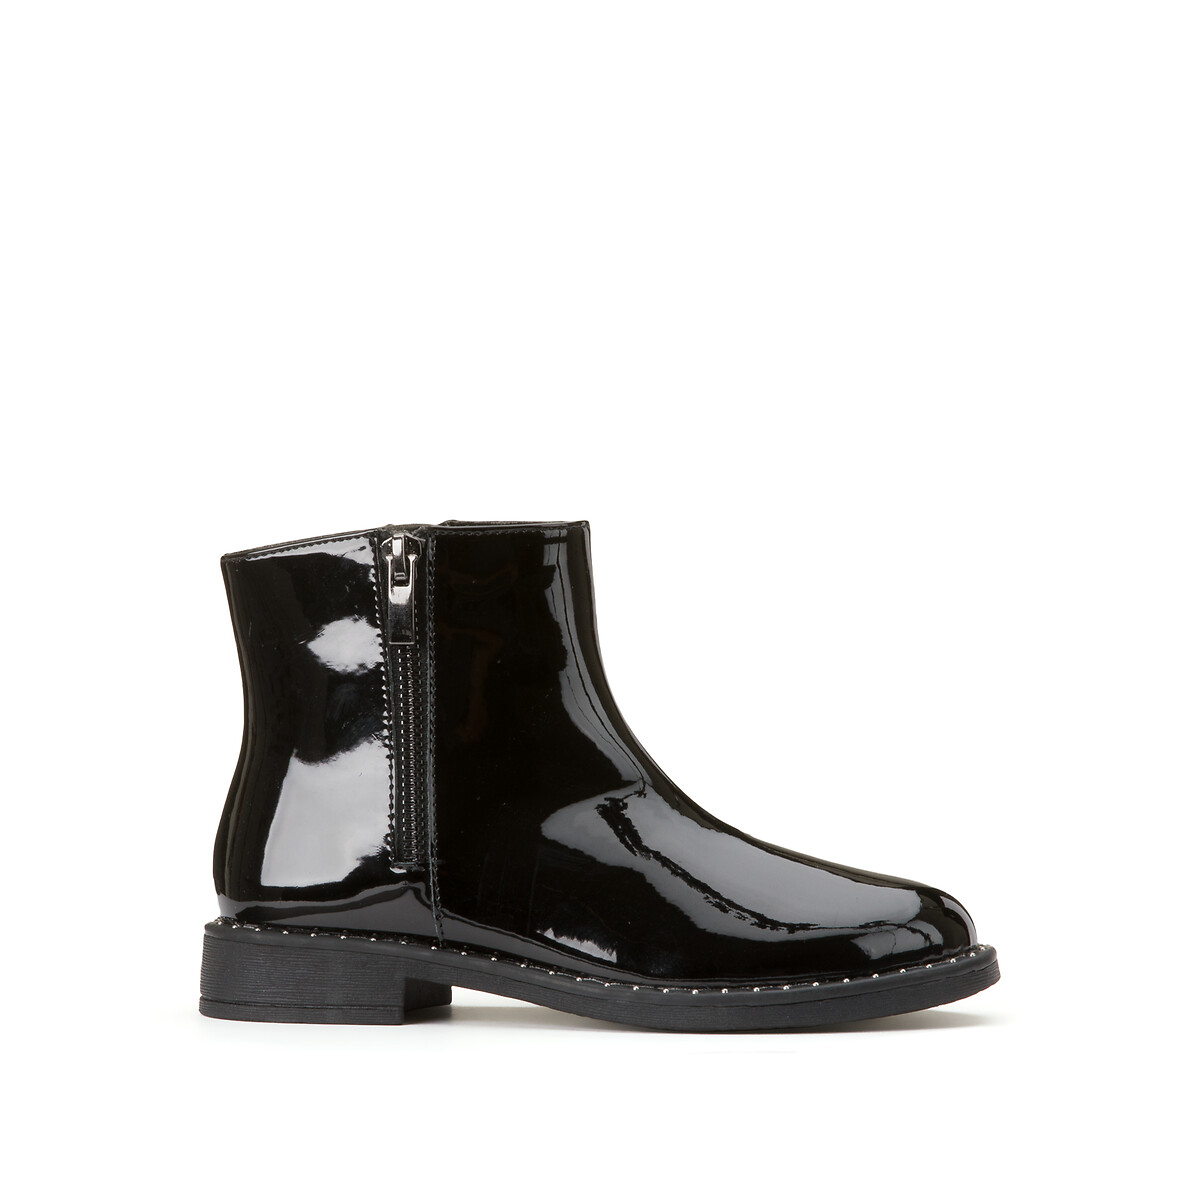 Kids patent ankle boots with zip fastening, black, La Redoute ...